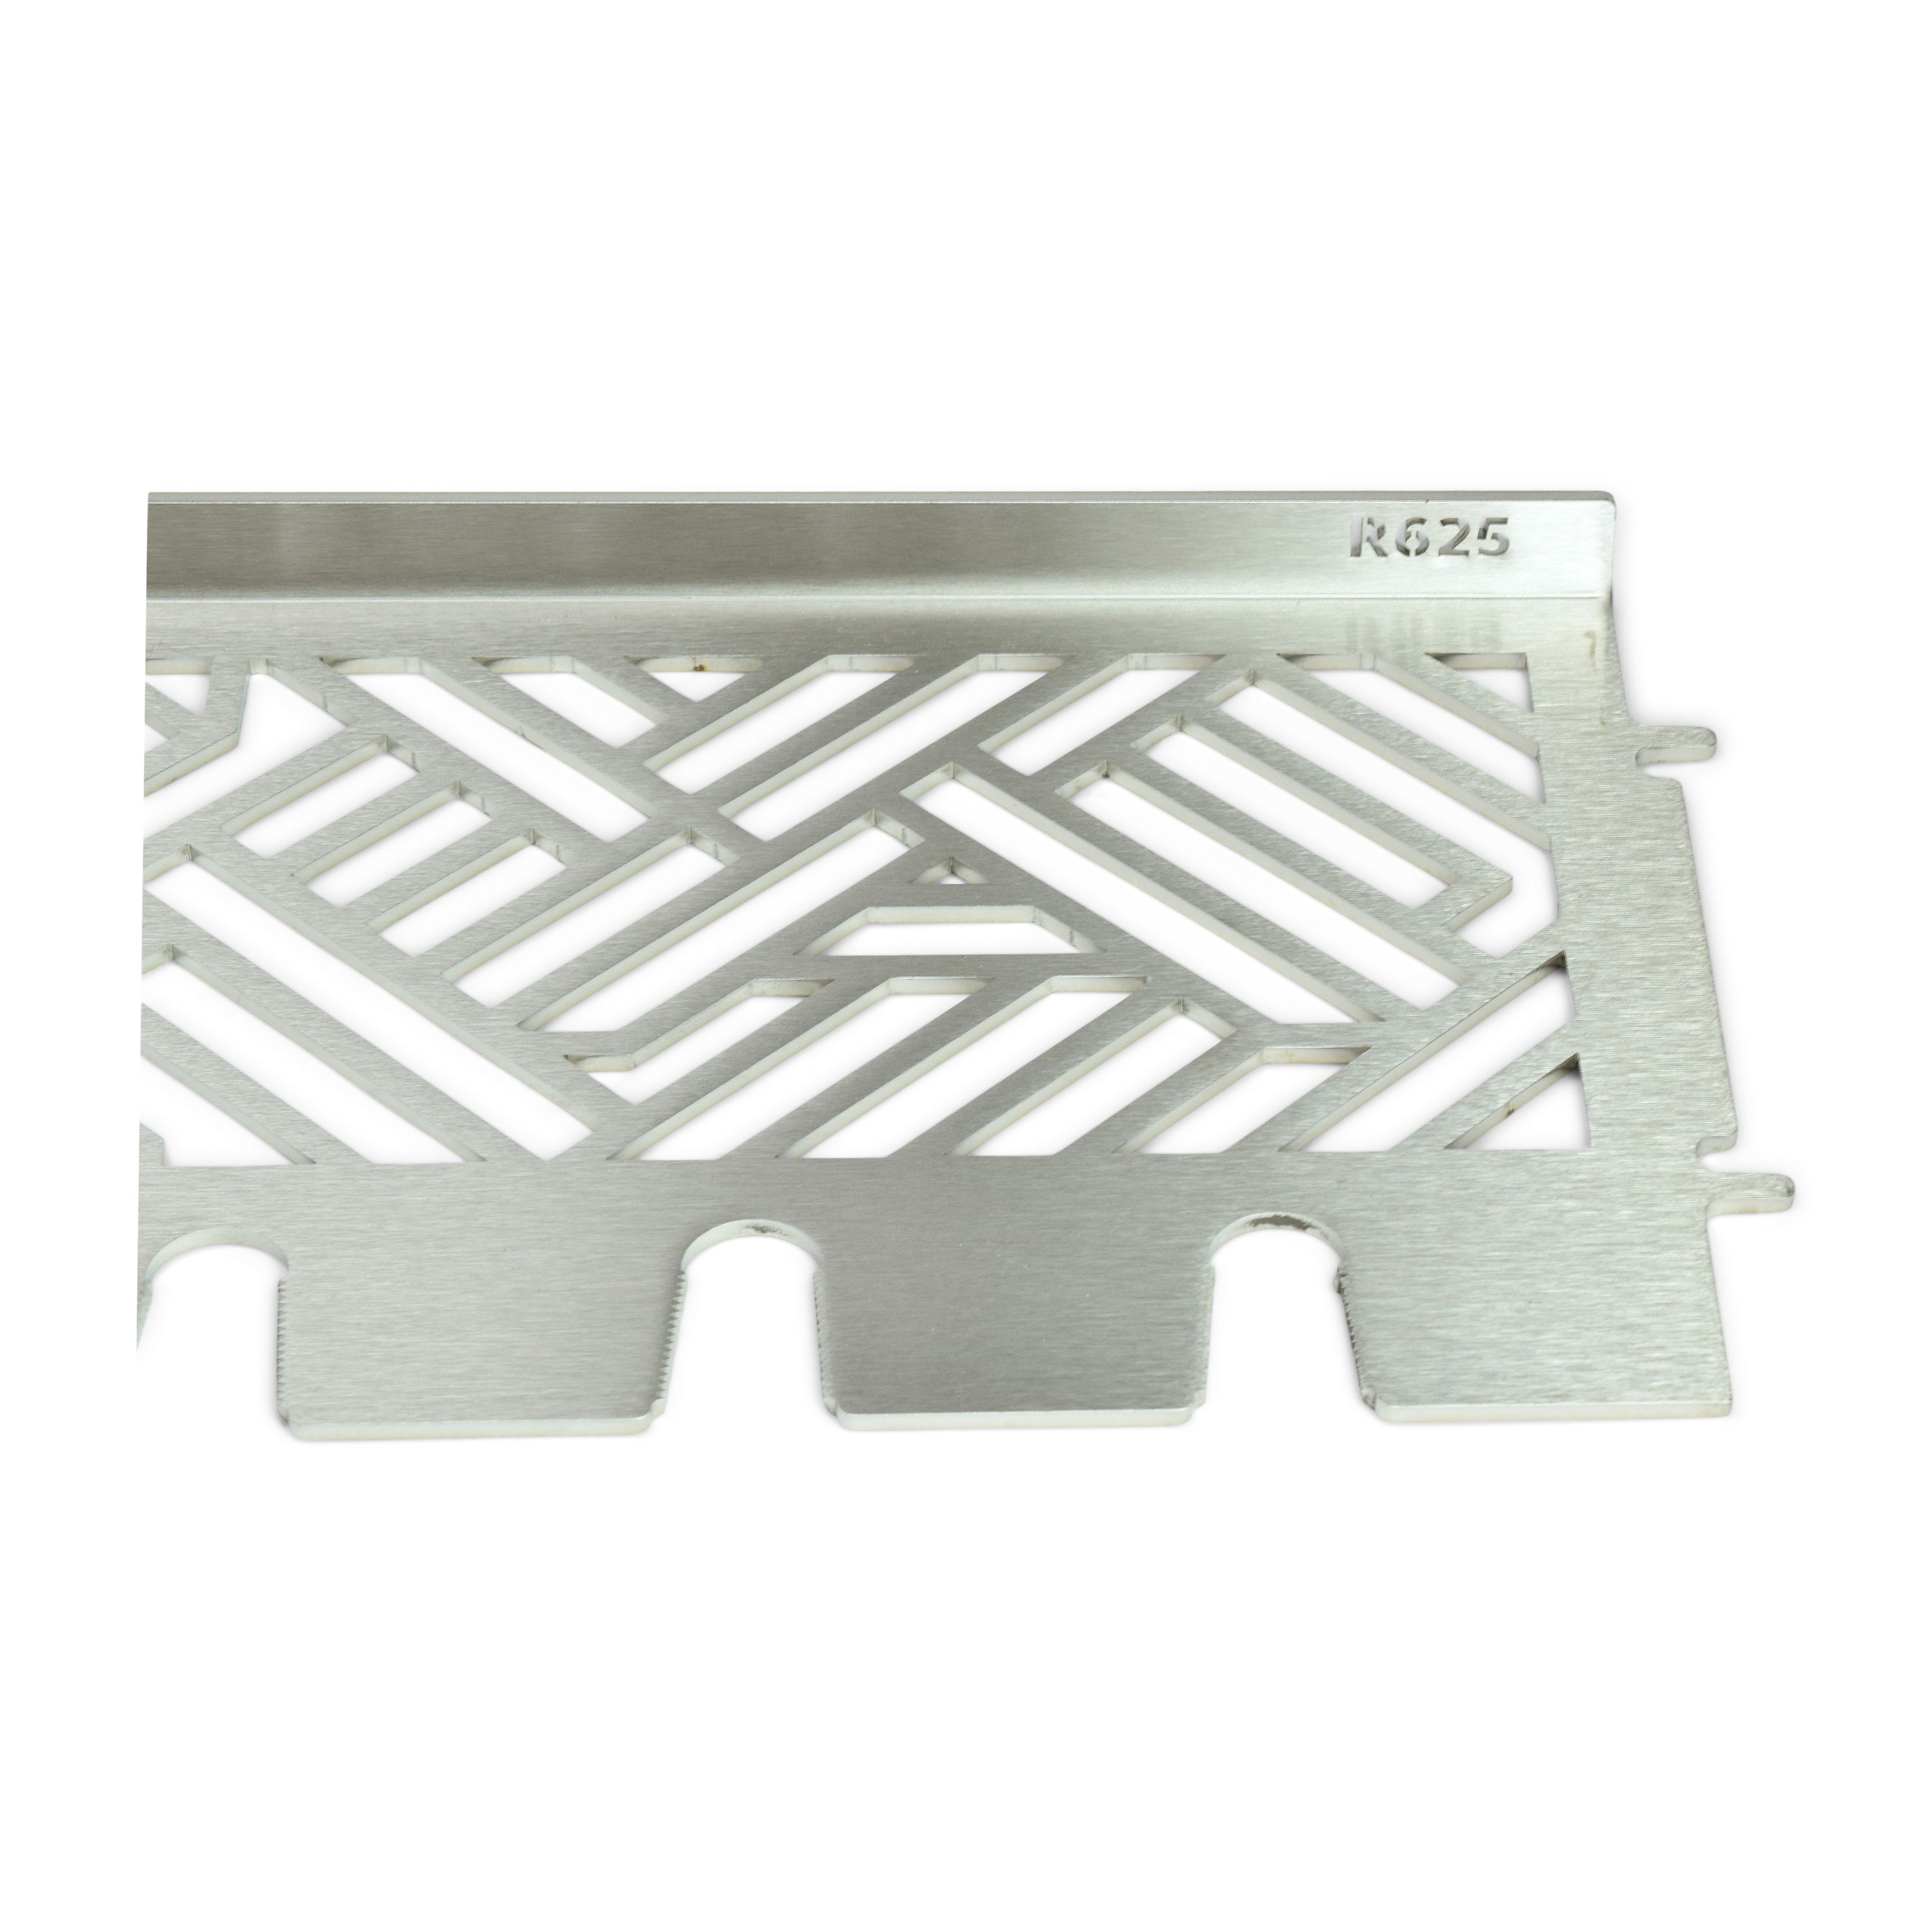 Stainless steel MultiStation for Napoleon Rogue 625 - Hot Grate